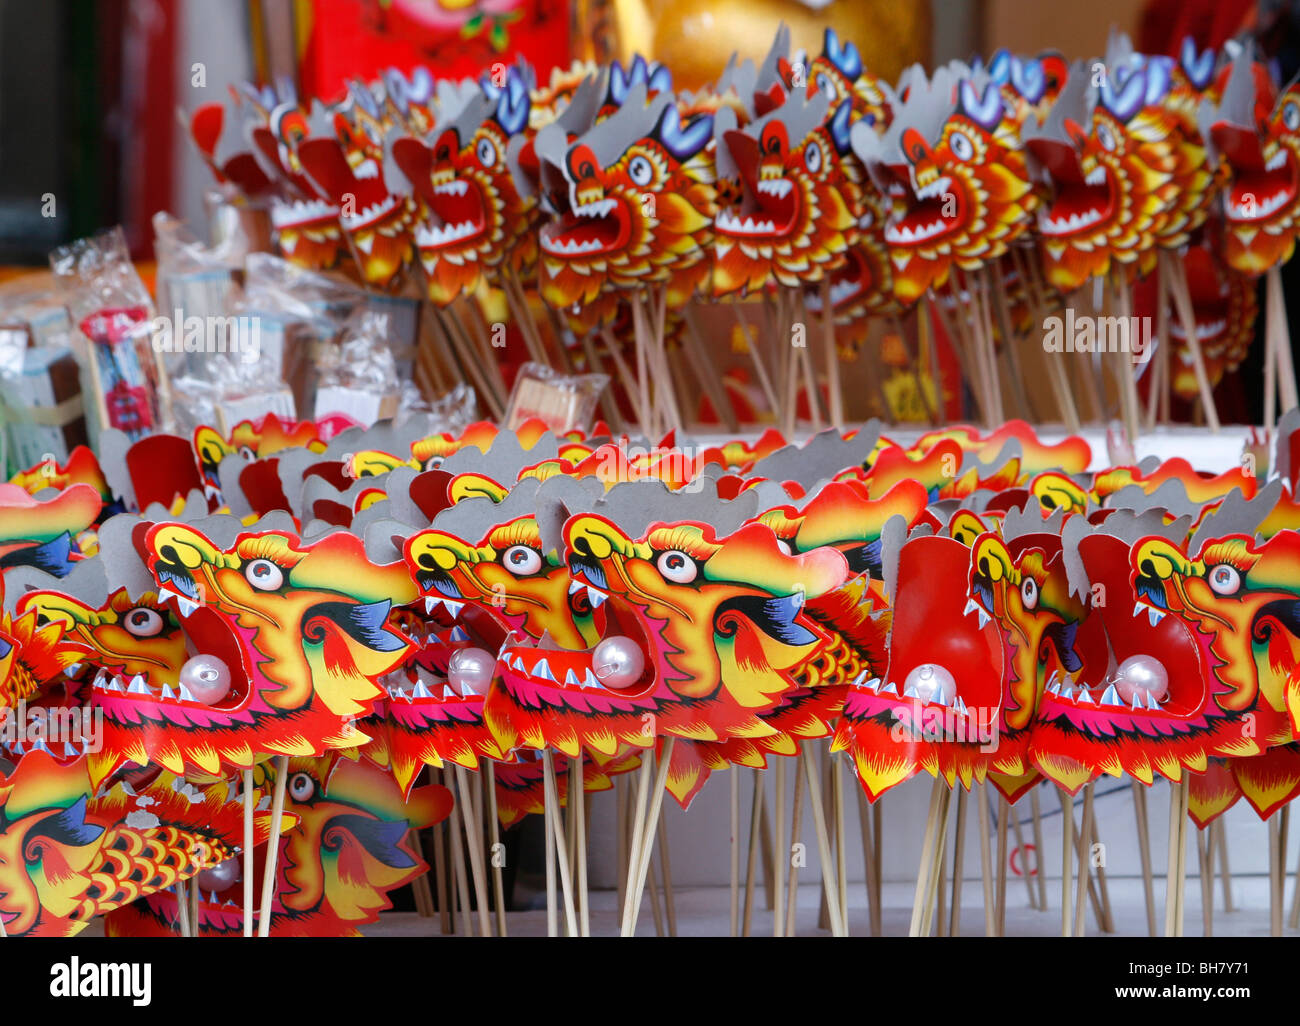 Paper dragons at the Chinese New Year celebrations in February 2009, in Manchester where there is a large Chinese community. Stock Photo